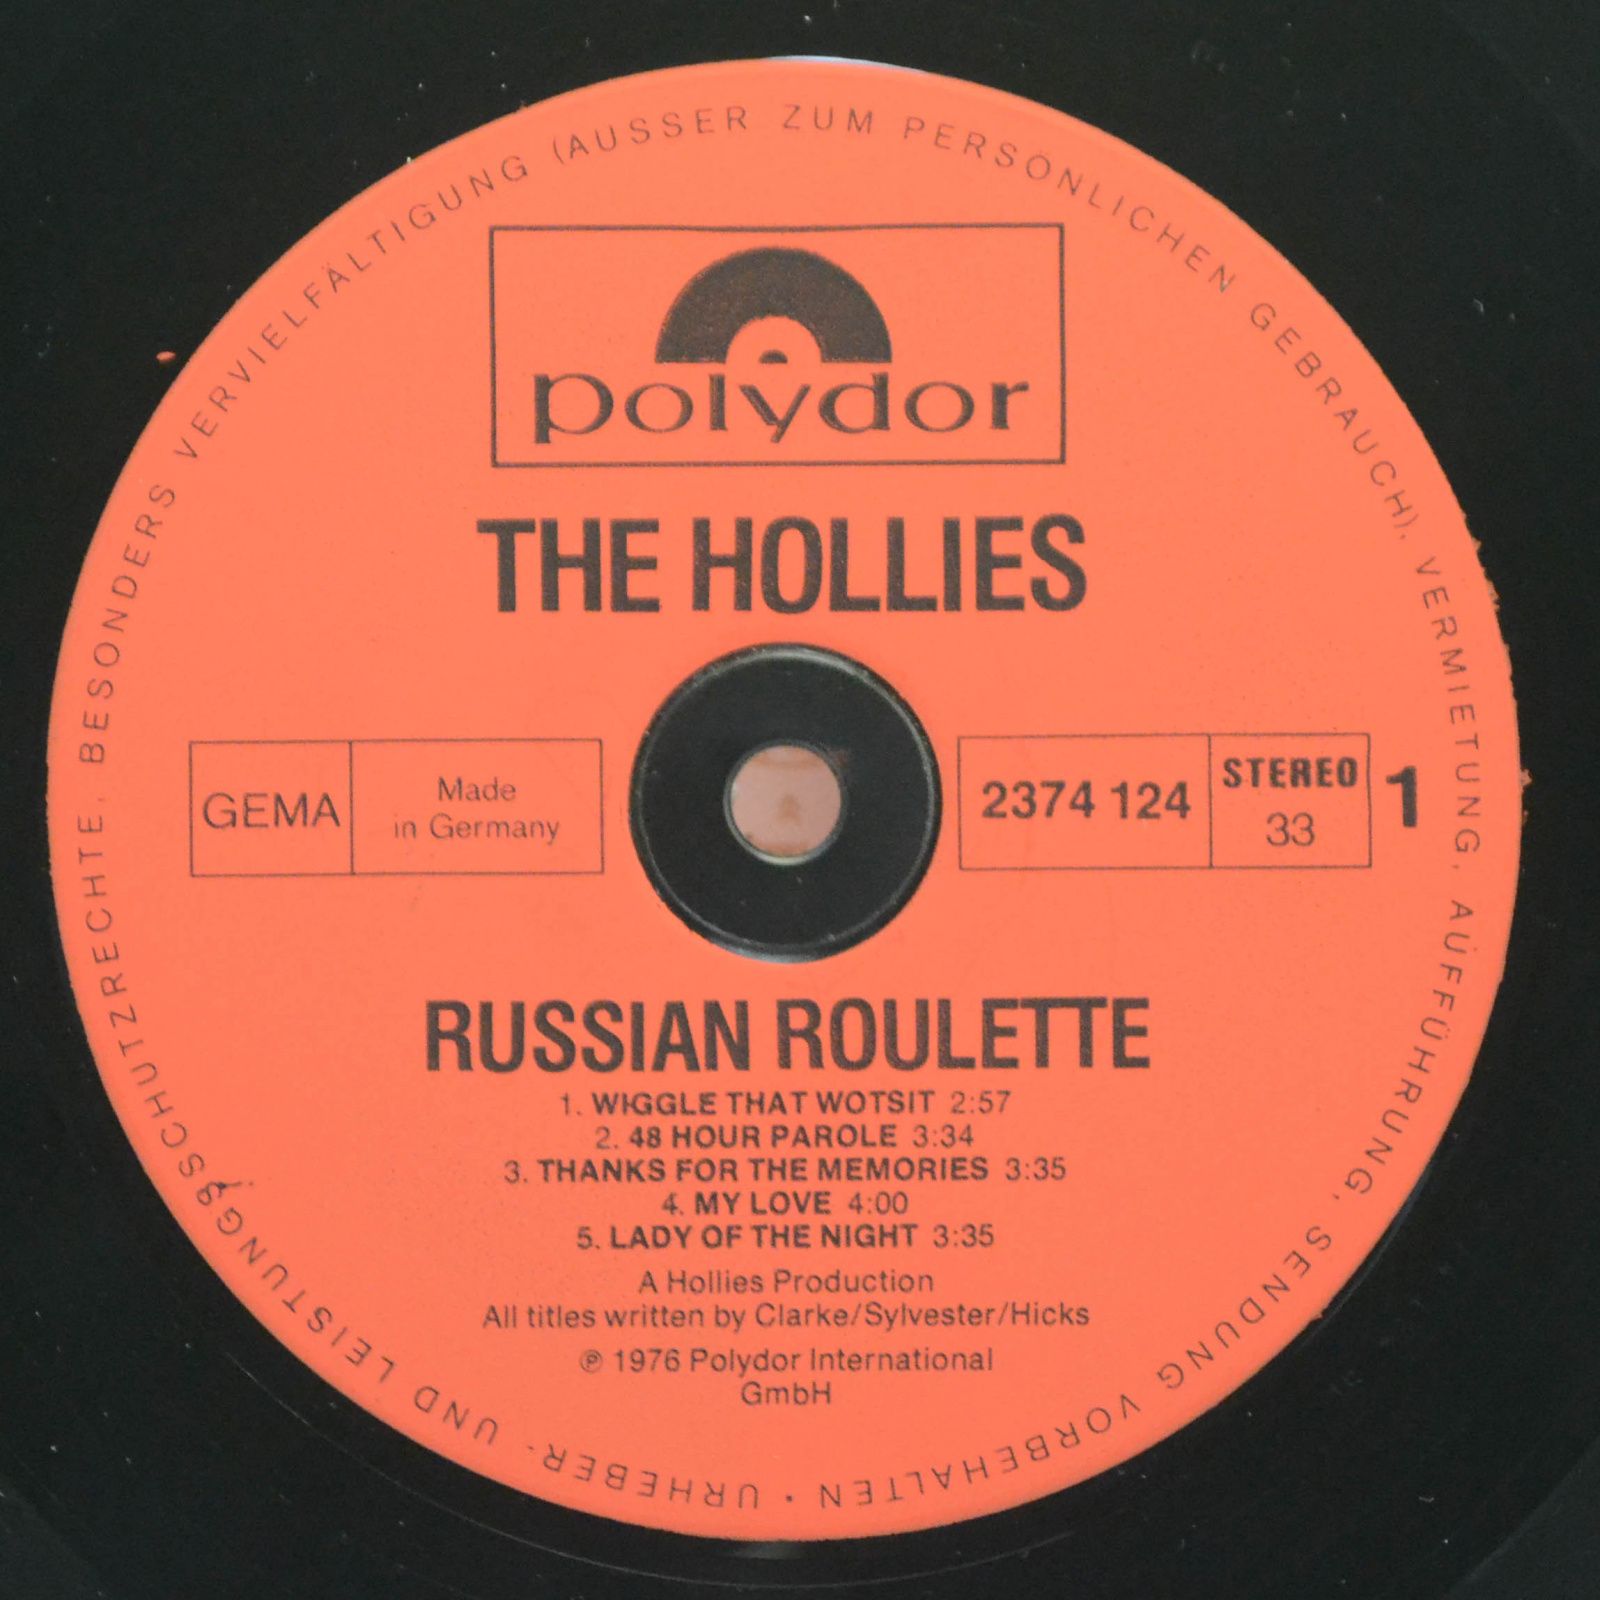 Hollies — Russian Roulette, 1976